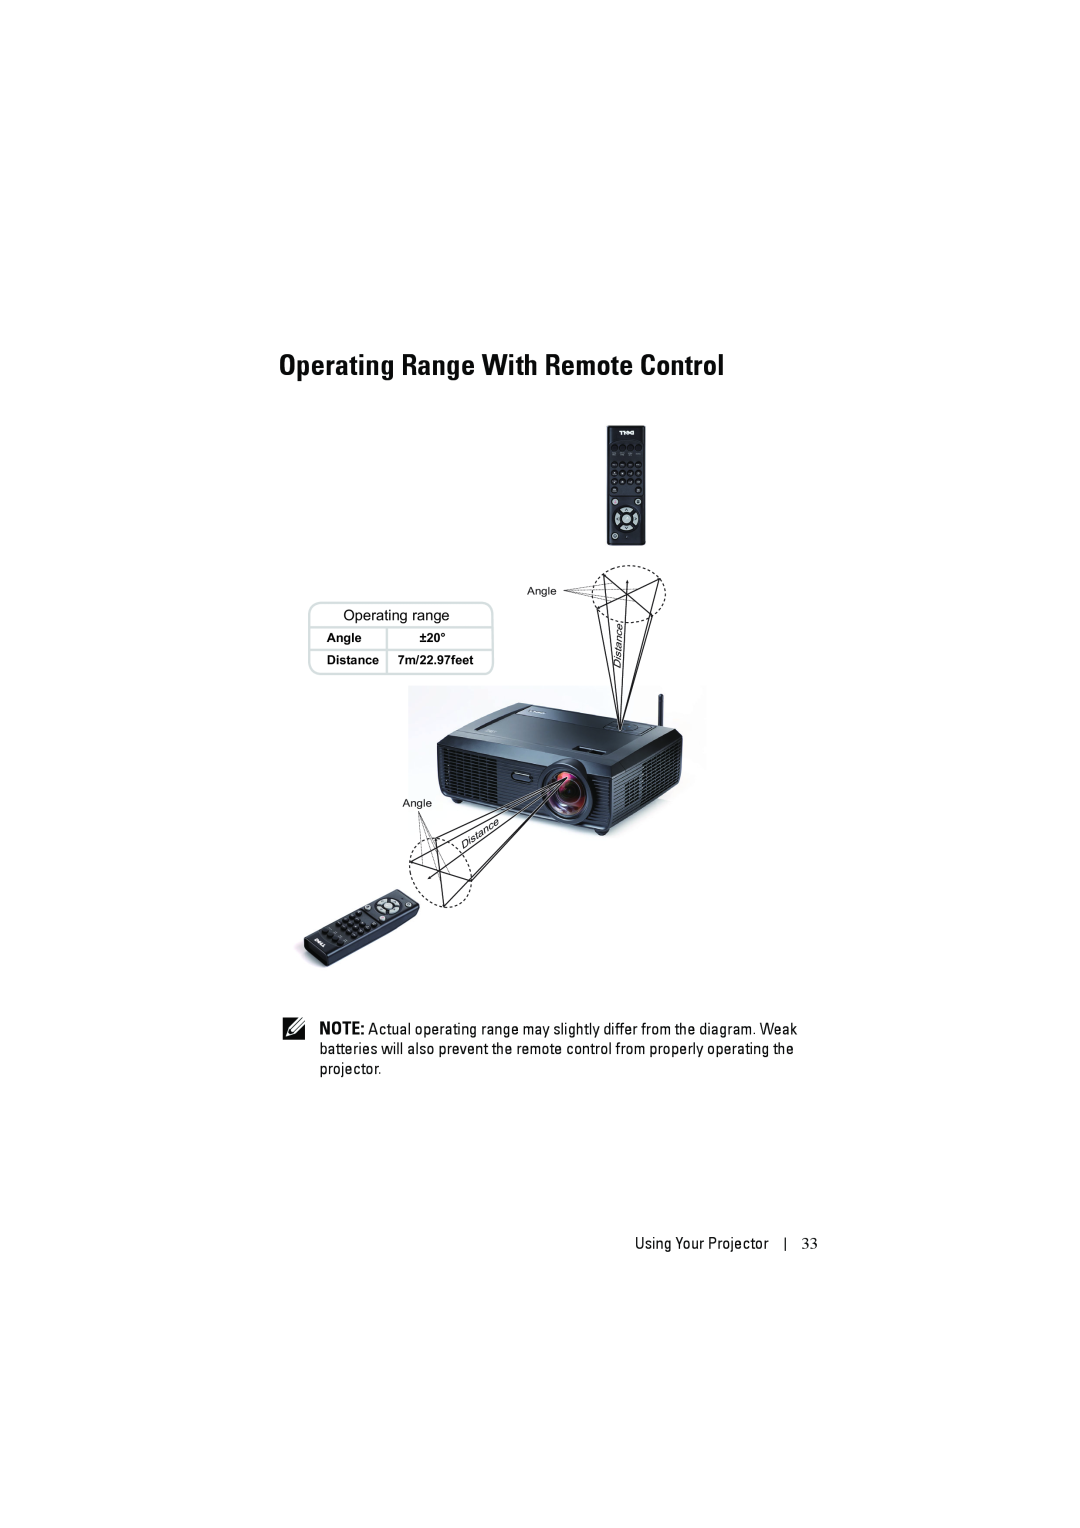 Dell S300W Operating Range With Remote Control, Using Your Projector, Operating range, Angle ±20 Distance 7m/22.97feet 